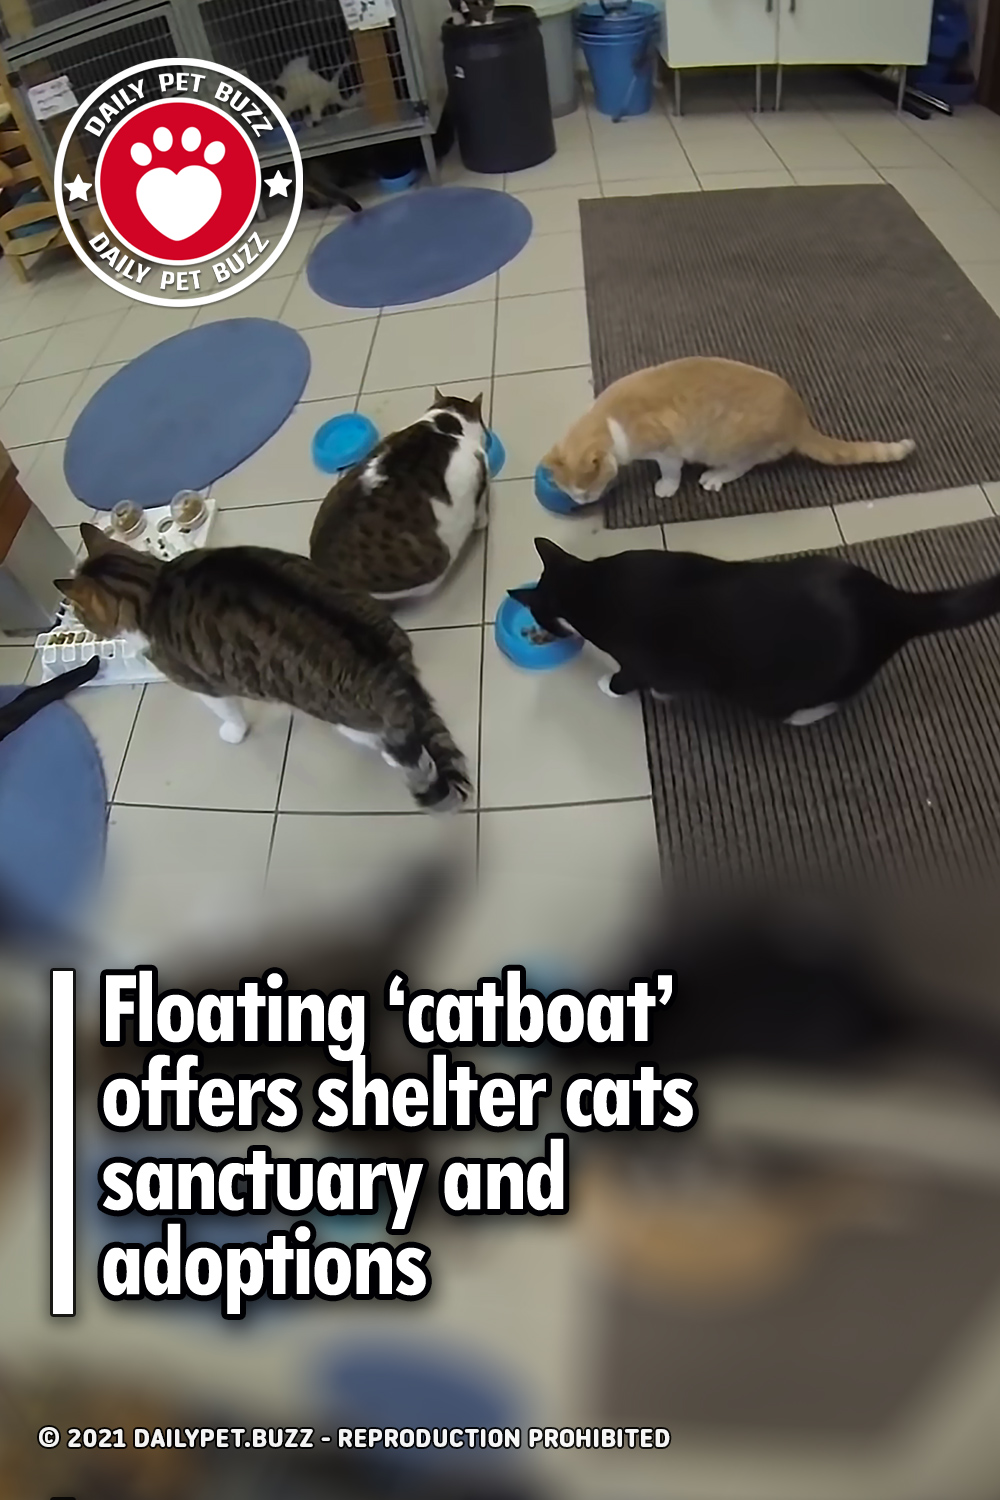 Floating ‘catboat’ offers shelter cats sanctuary and adoptions